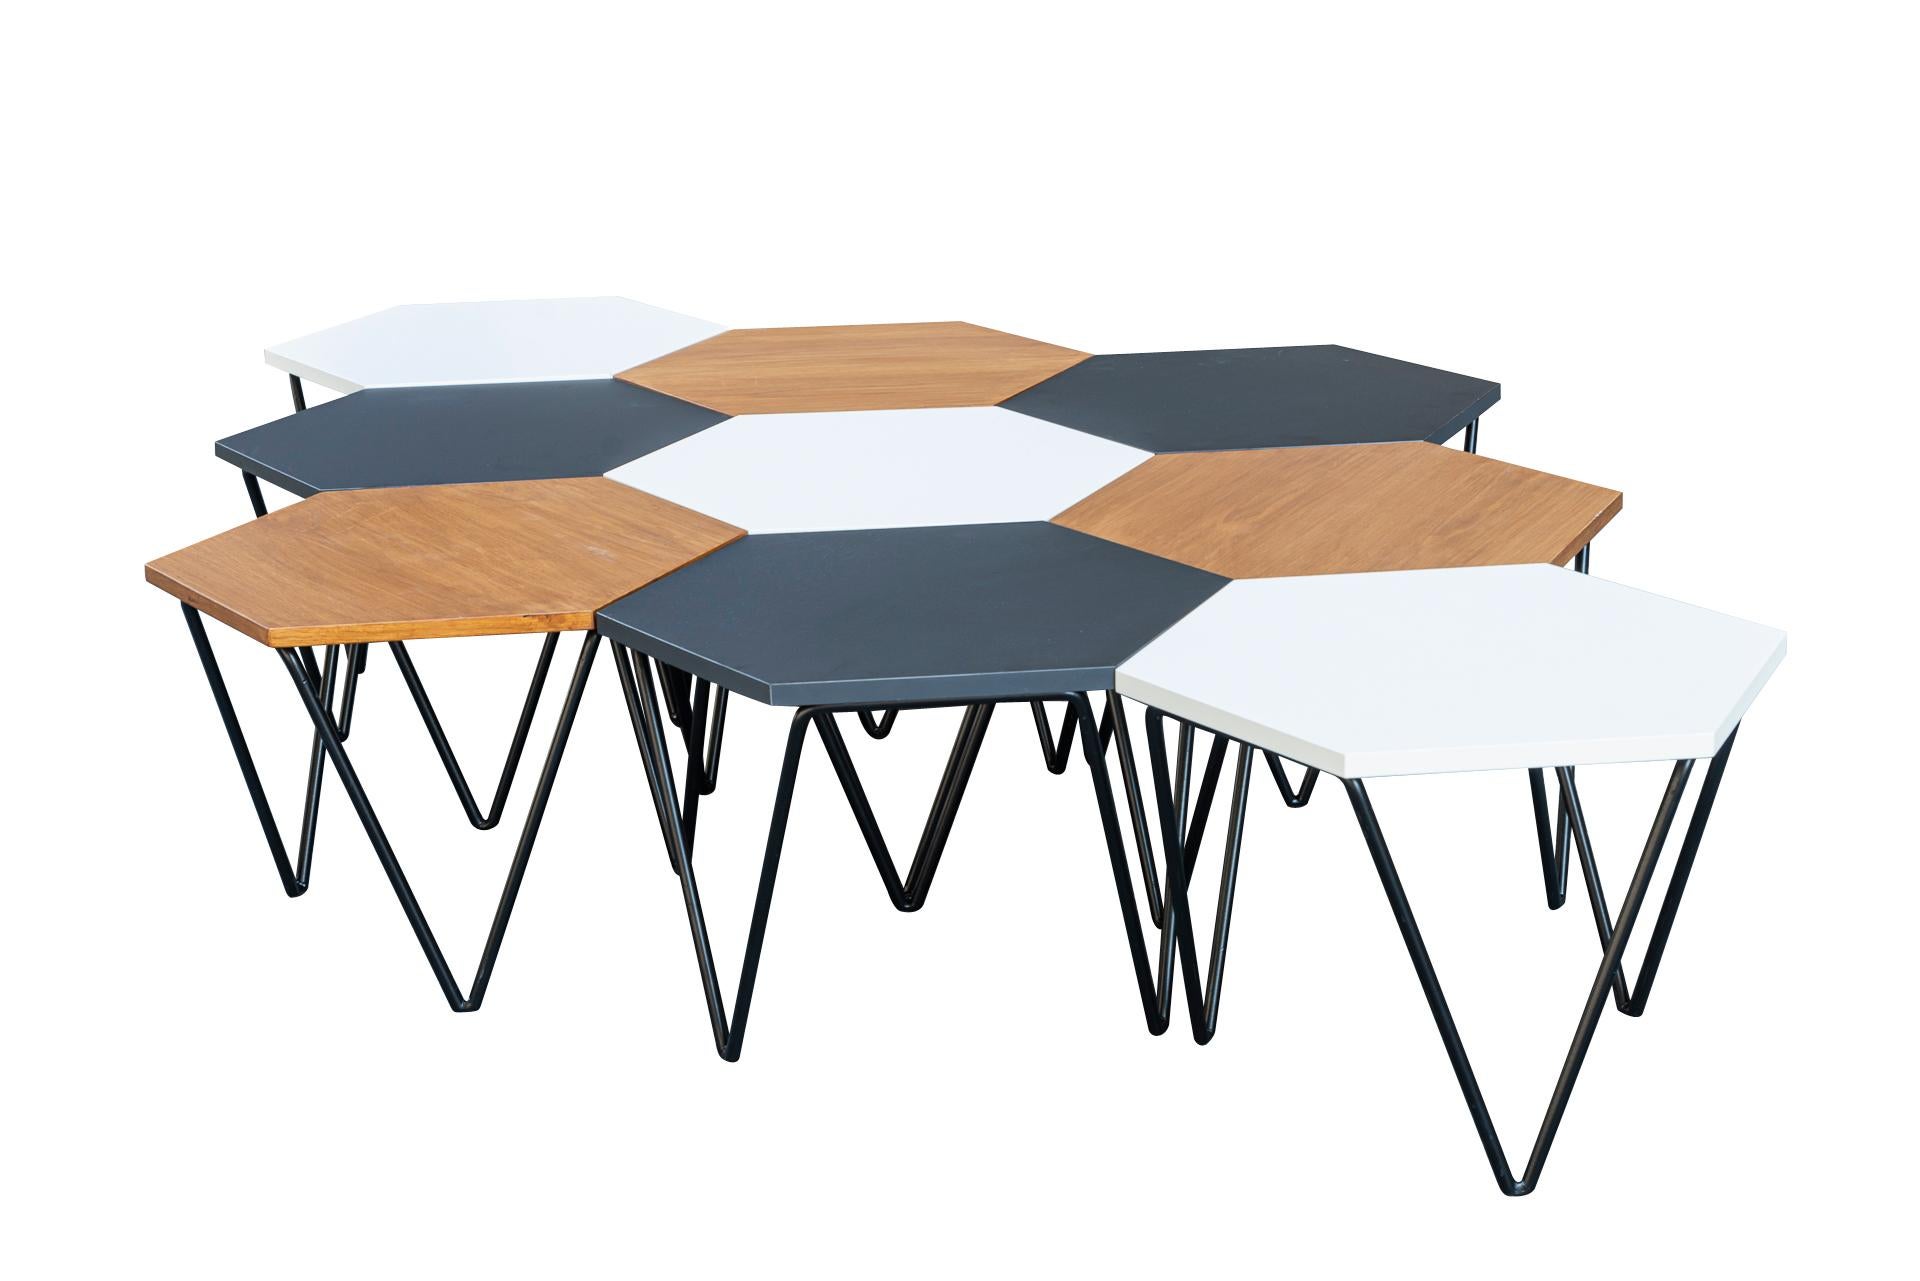 Gio Ponti, 
Set of 9 coffee tables, 
3 black laminated, 3 white laminated, 3 wood,
Black painted iron foot,
Edition ISA, 
Italy, circa 1970.

Measures: (One Table) diameter 58 cm, height 40 cm.
(Full Set) width 235 cm, depth 152 cm, height